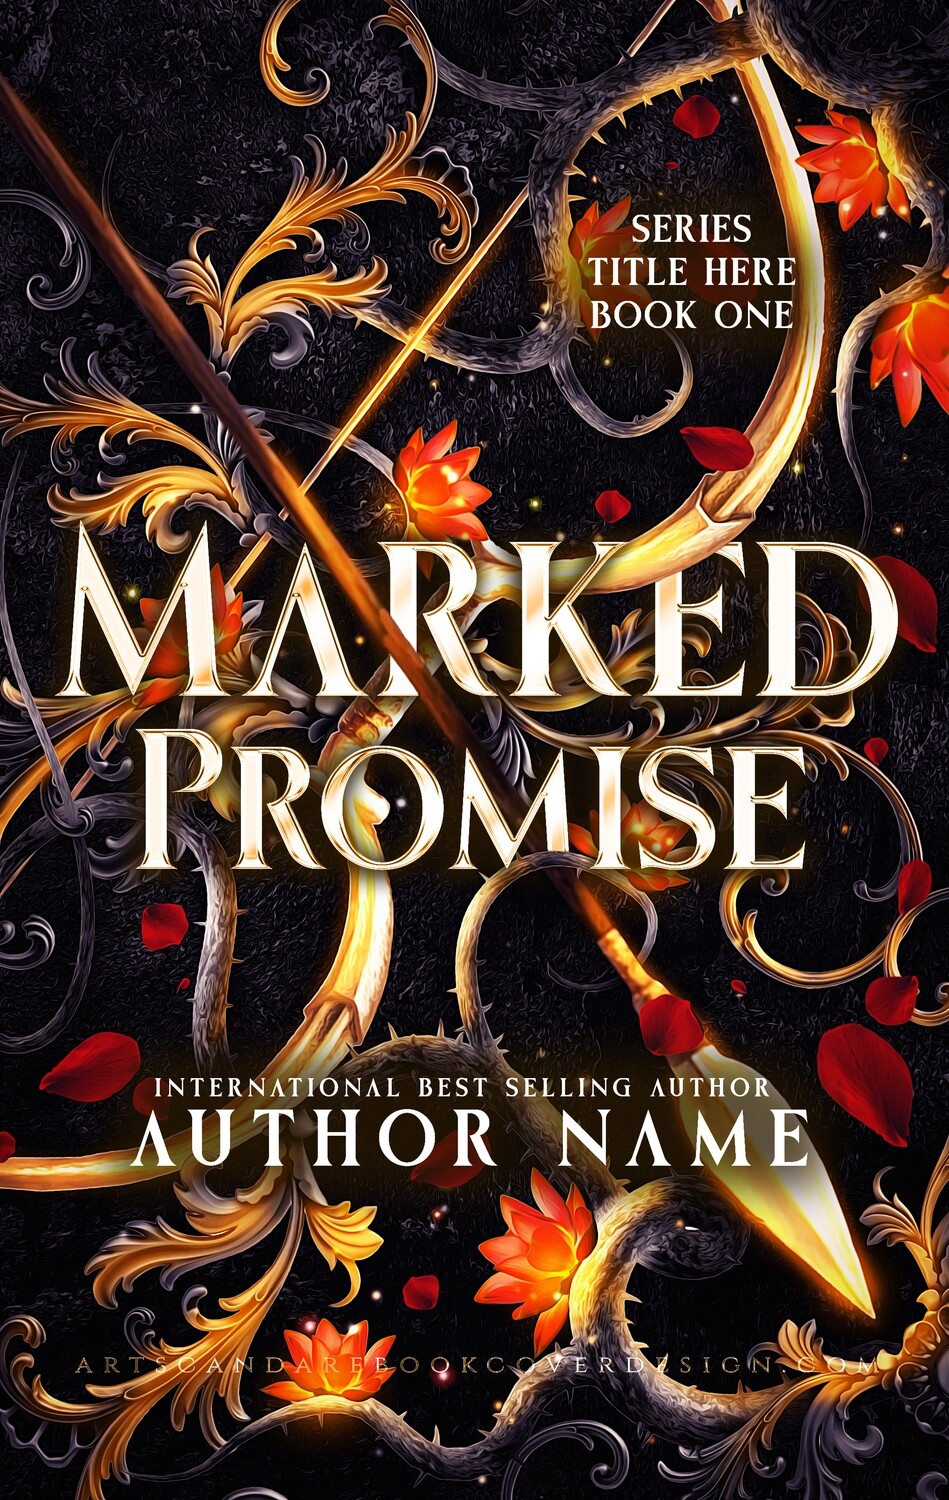 MARKED PROMISE